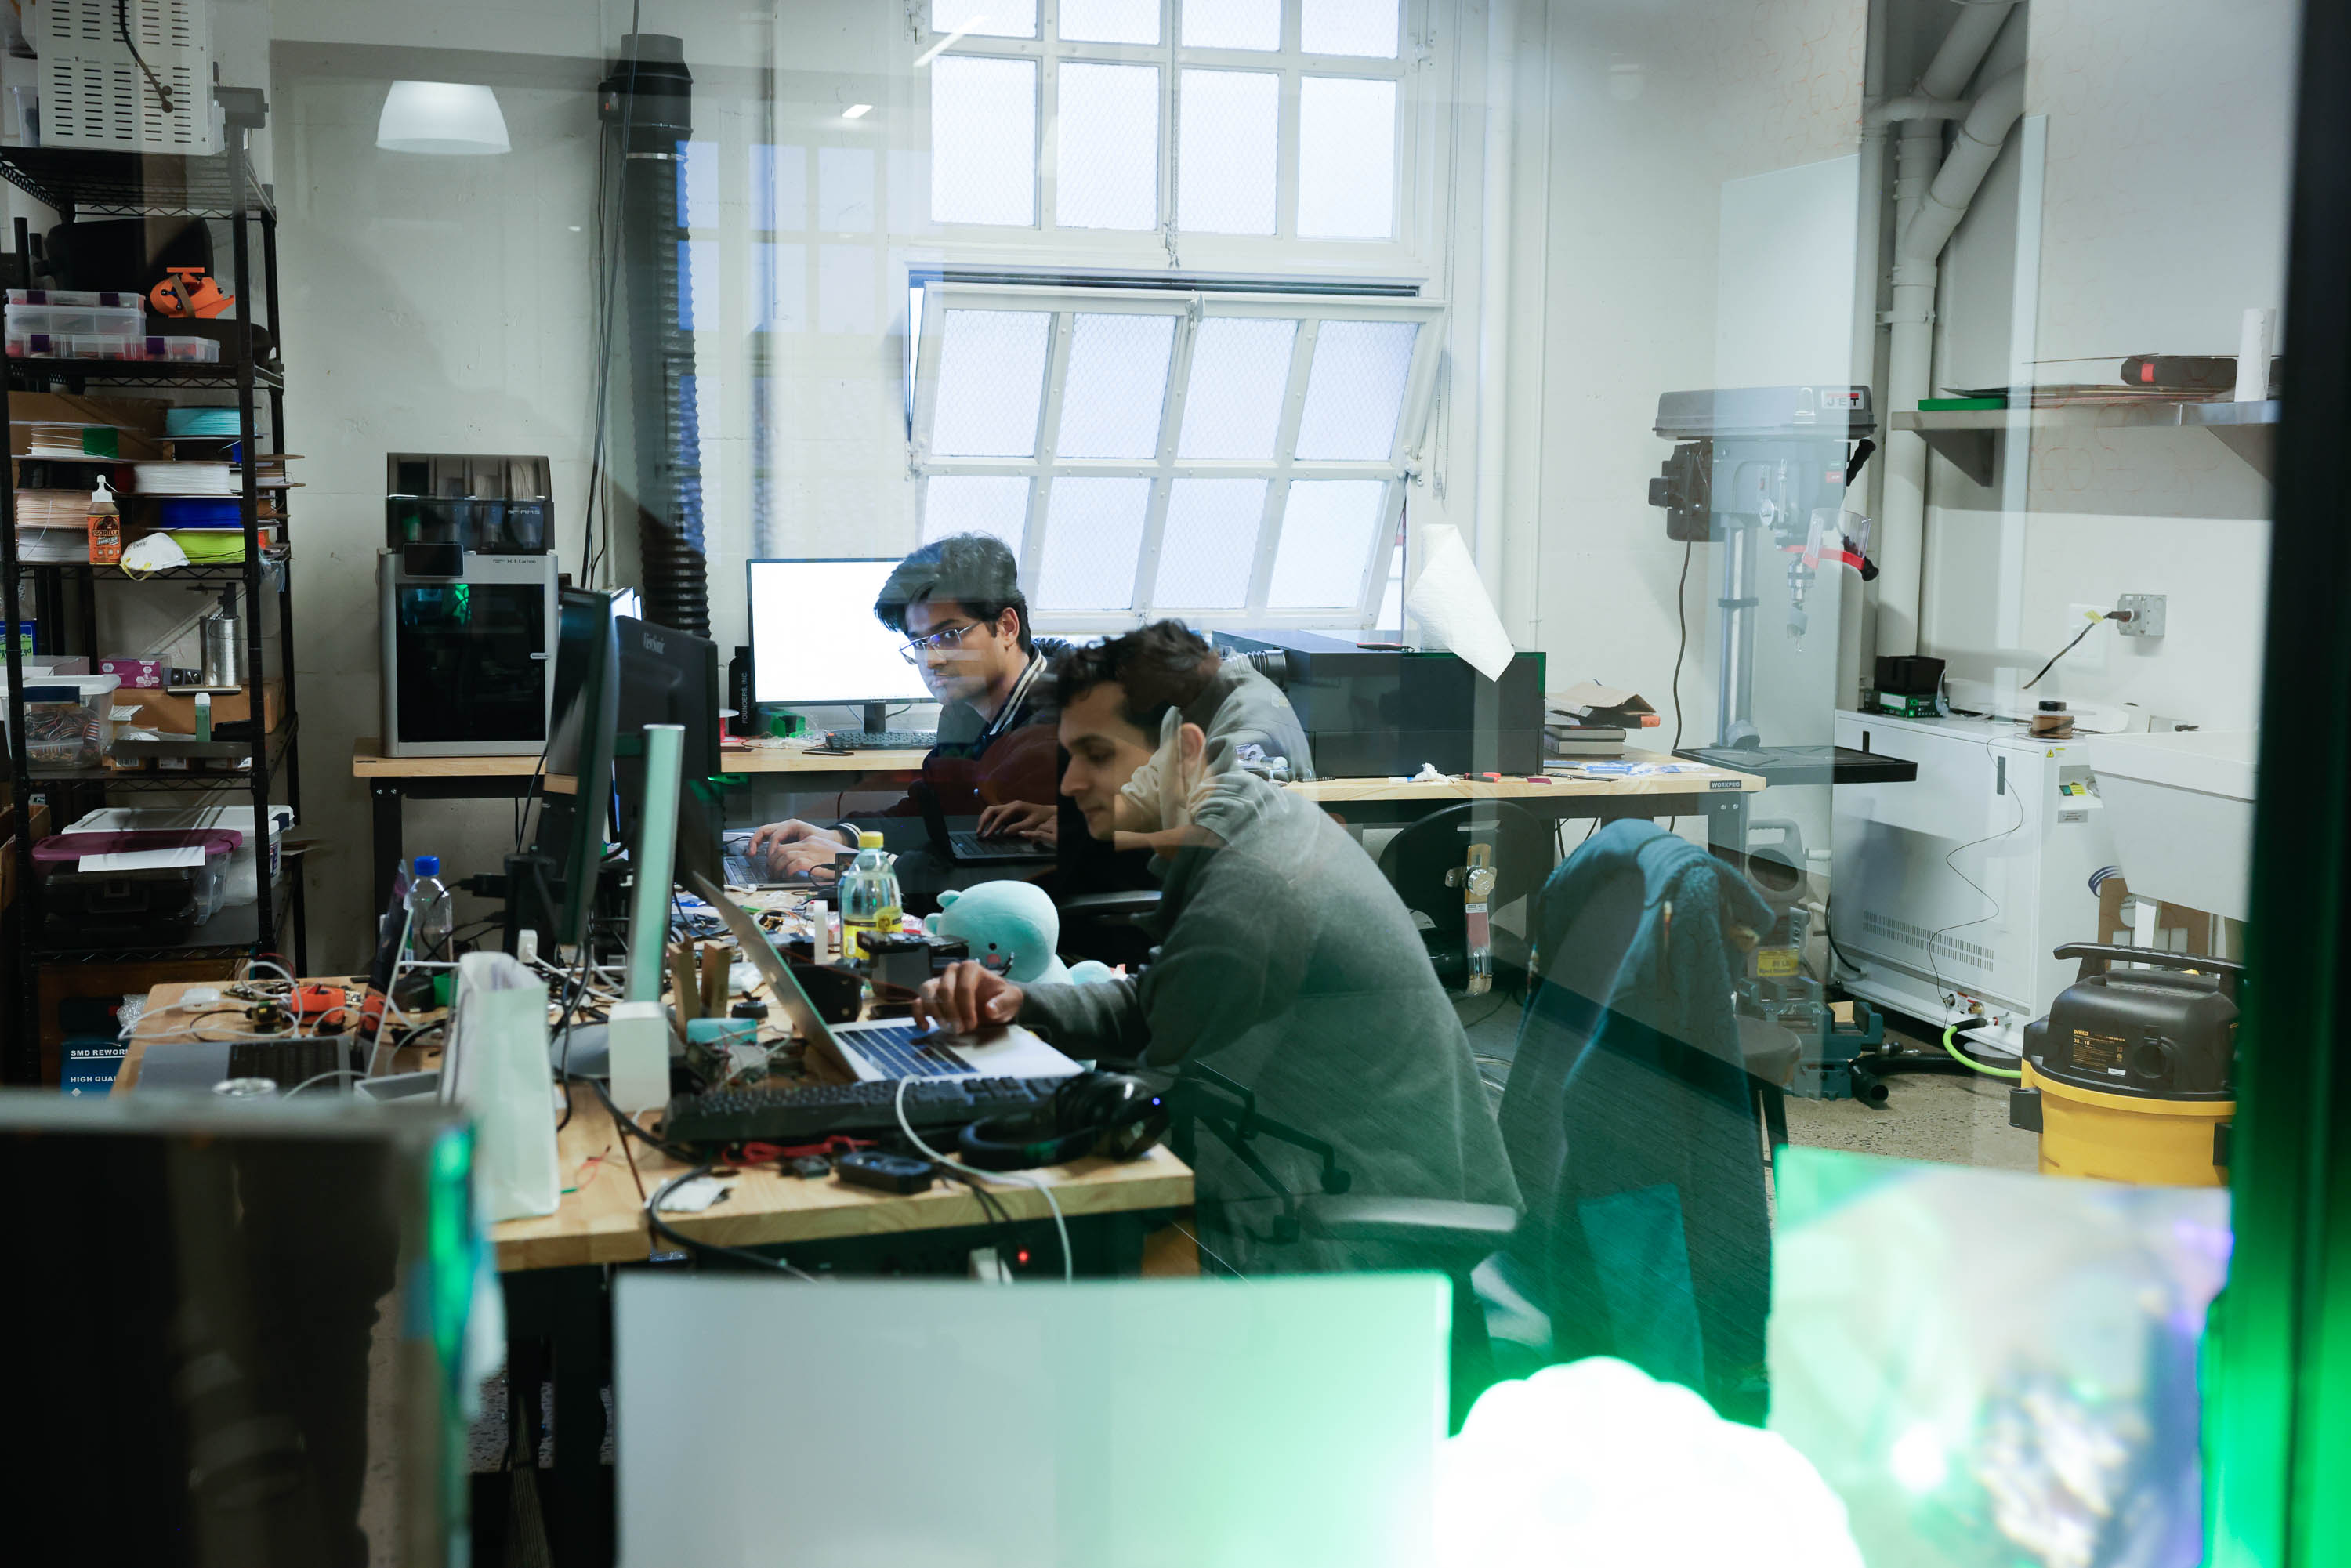 Two people work at cluttered desks with electronic equipment in a workshop-like room.